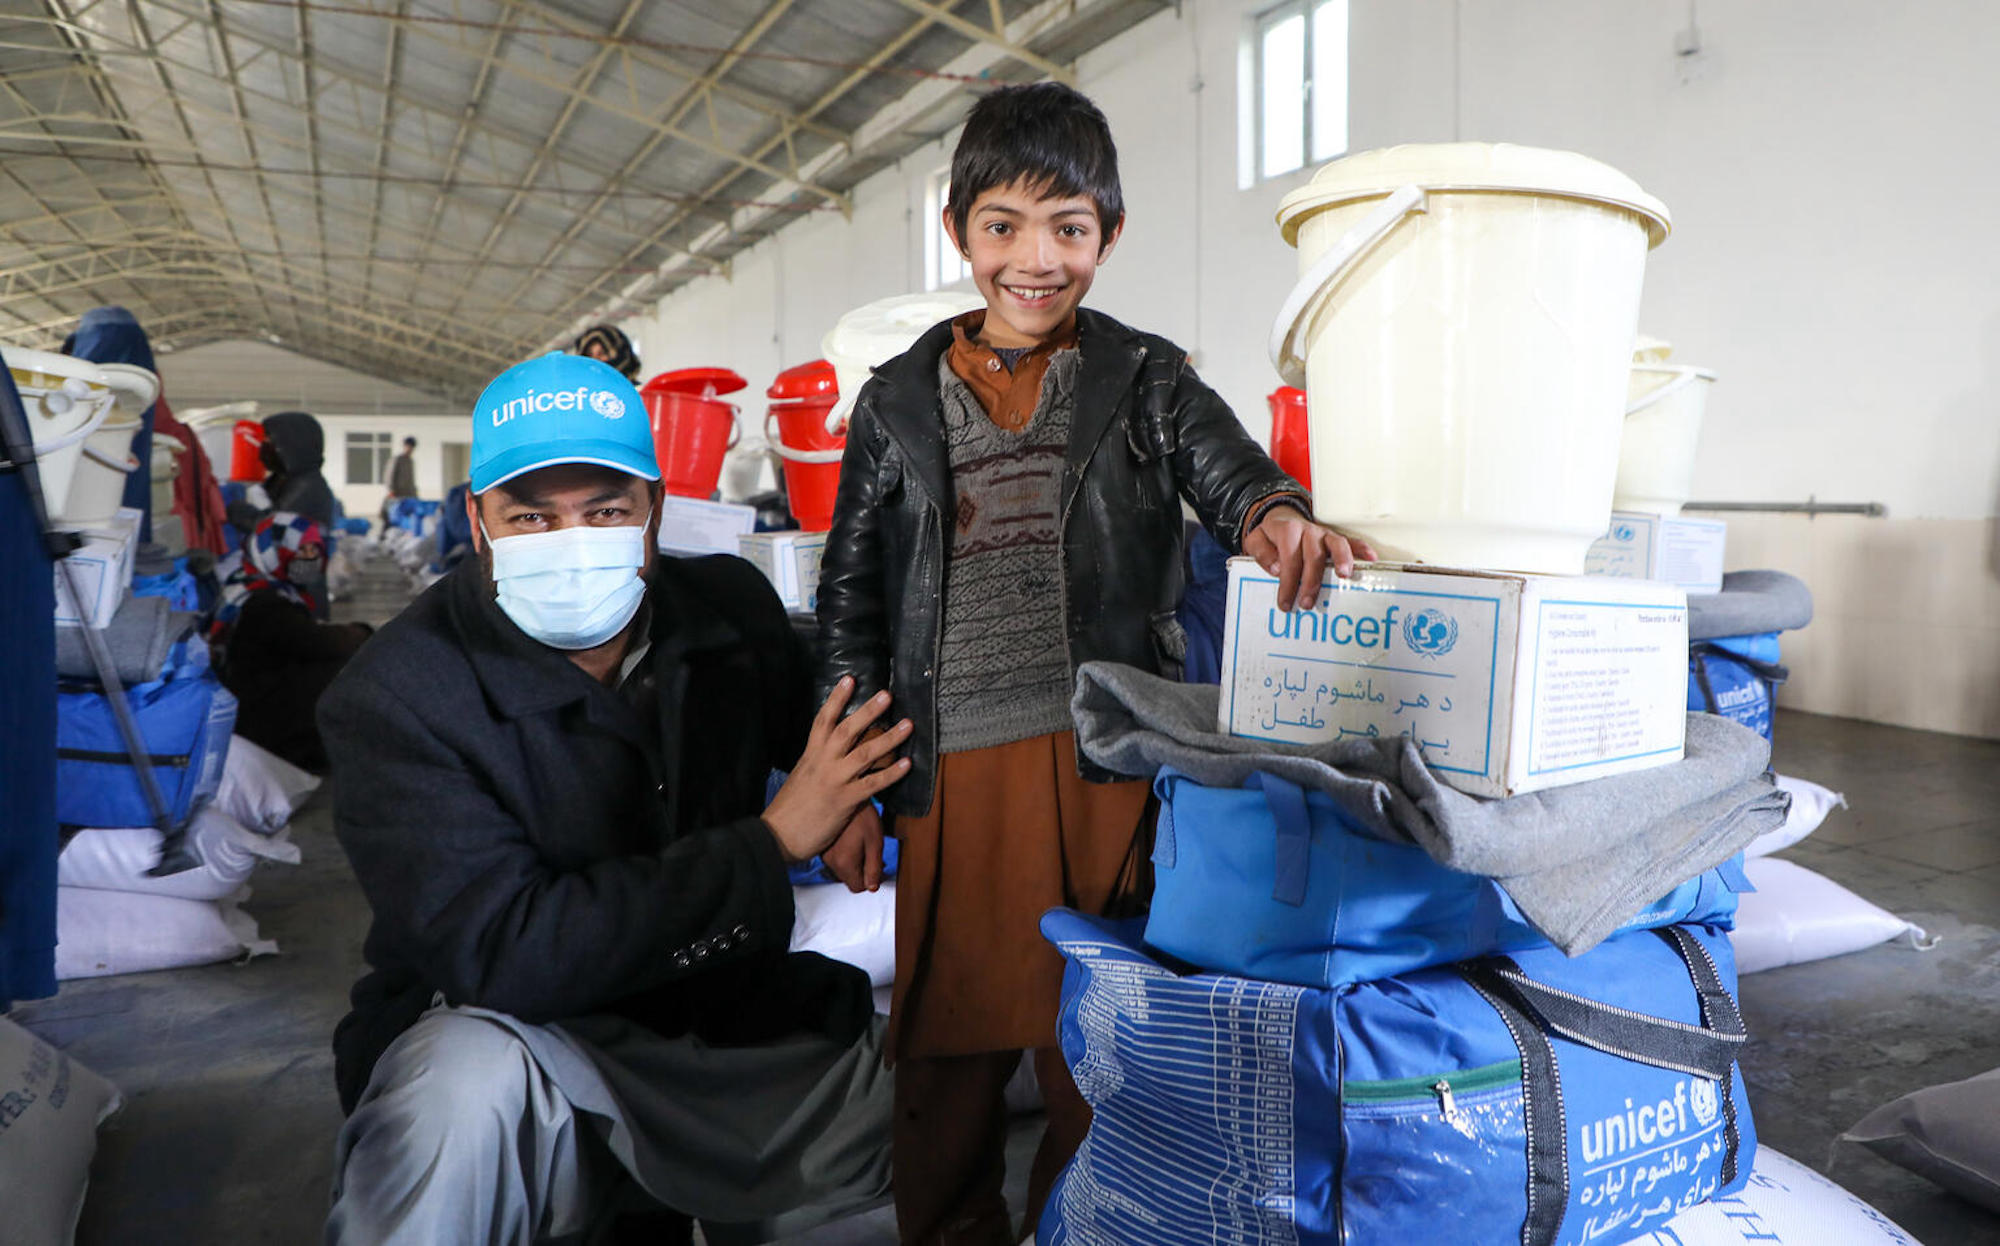 On Jan. 18, 2022, in Kabul, Afghanistan,11-year-old Hadi thanks Mohammad Khalid Azami, WASH Officer at UNICEF Afghanistan, for the winter gear he has just received from UNICEF.